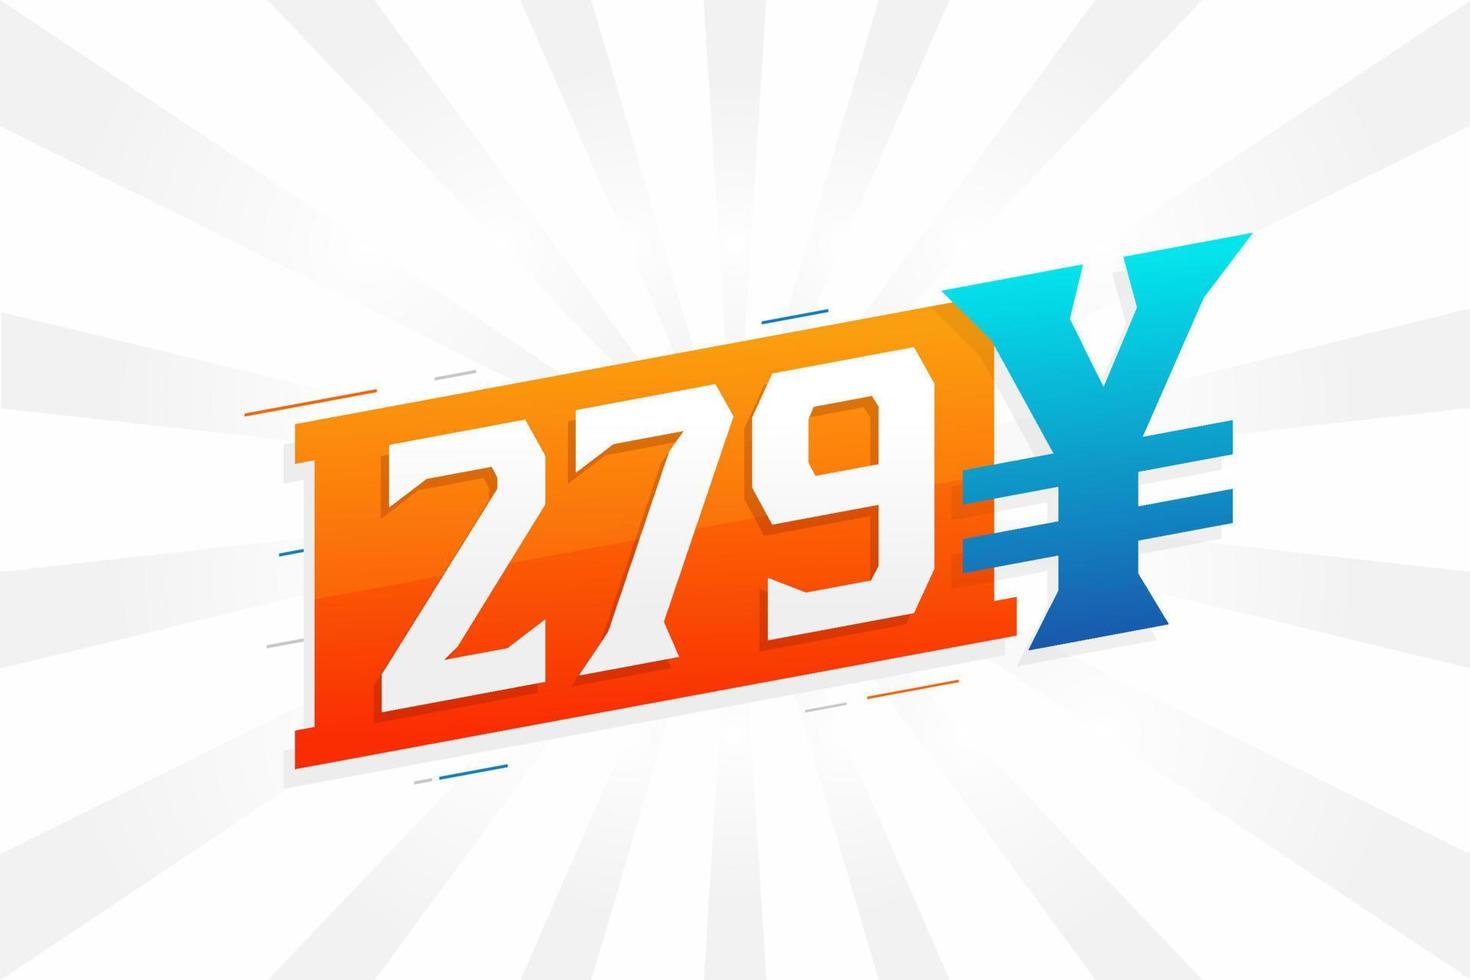 279 Yuan Chinese currency vector text symbol. 279 Yen Japanese currency Money stock vector